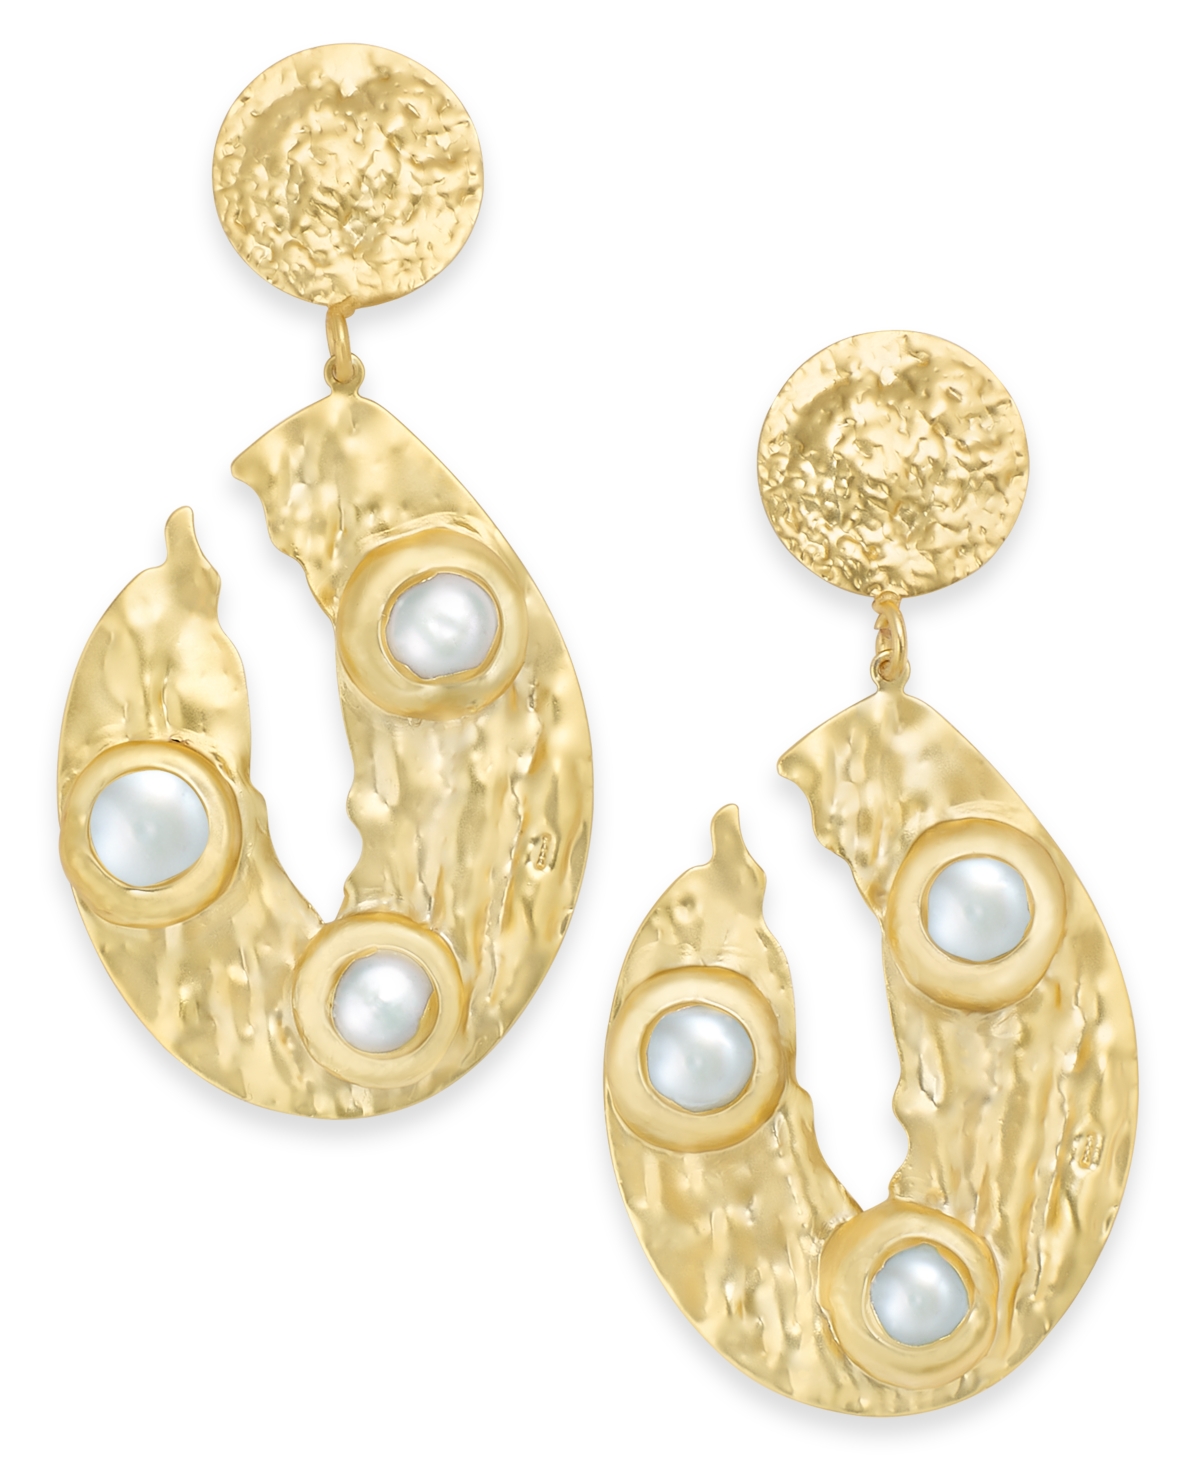 Lola Ade 18k Gold-plated Sterling Silver Hammered Imitation Pearl Drop Earrings